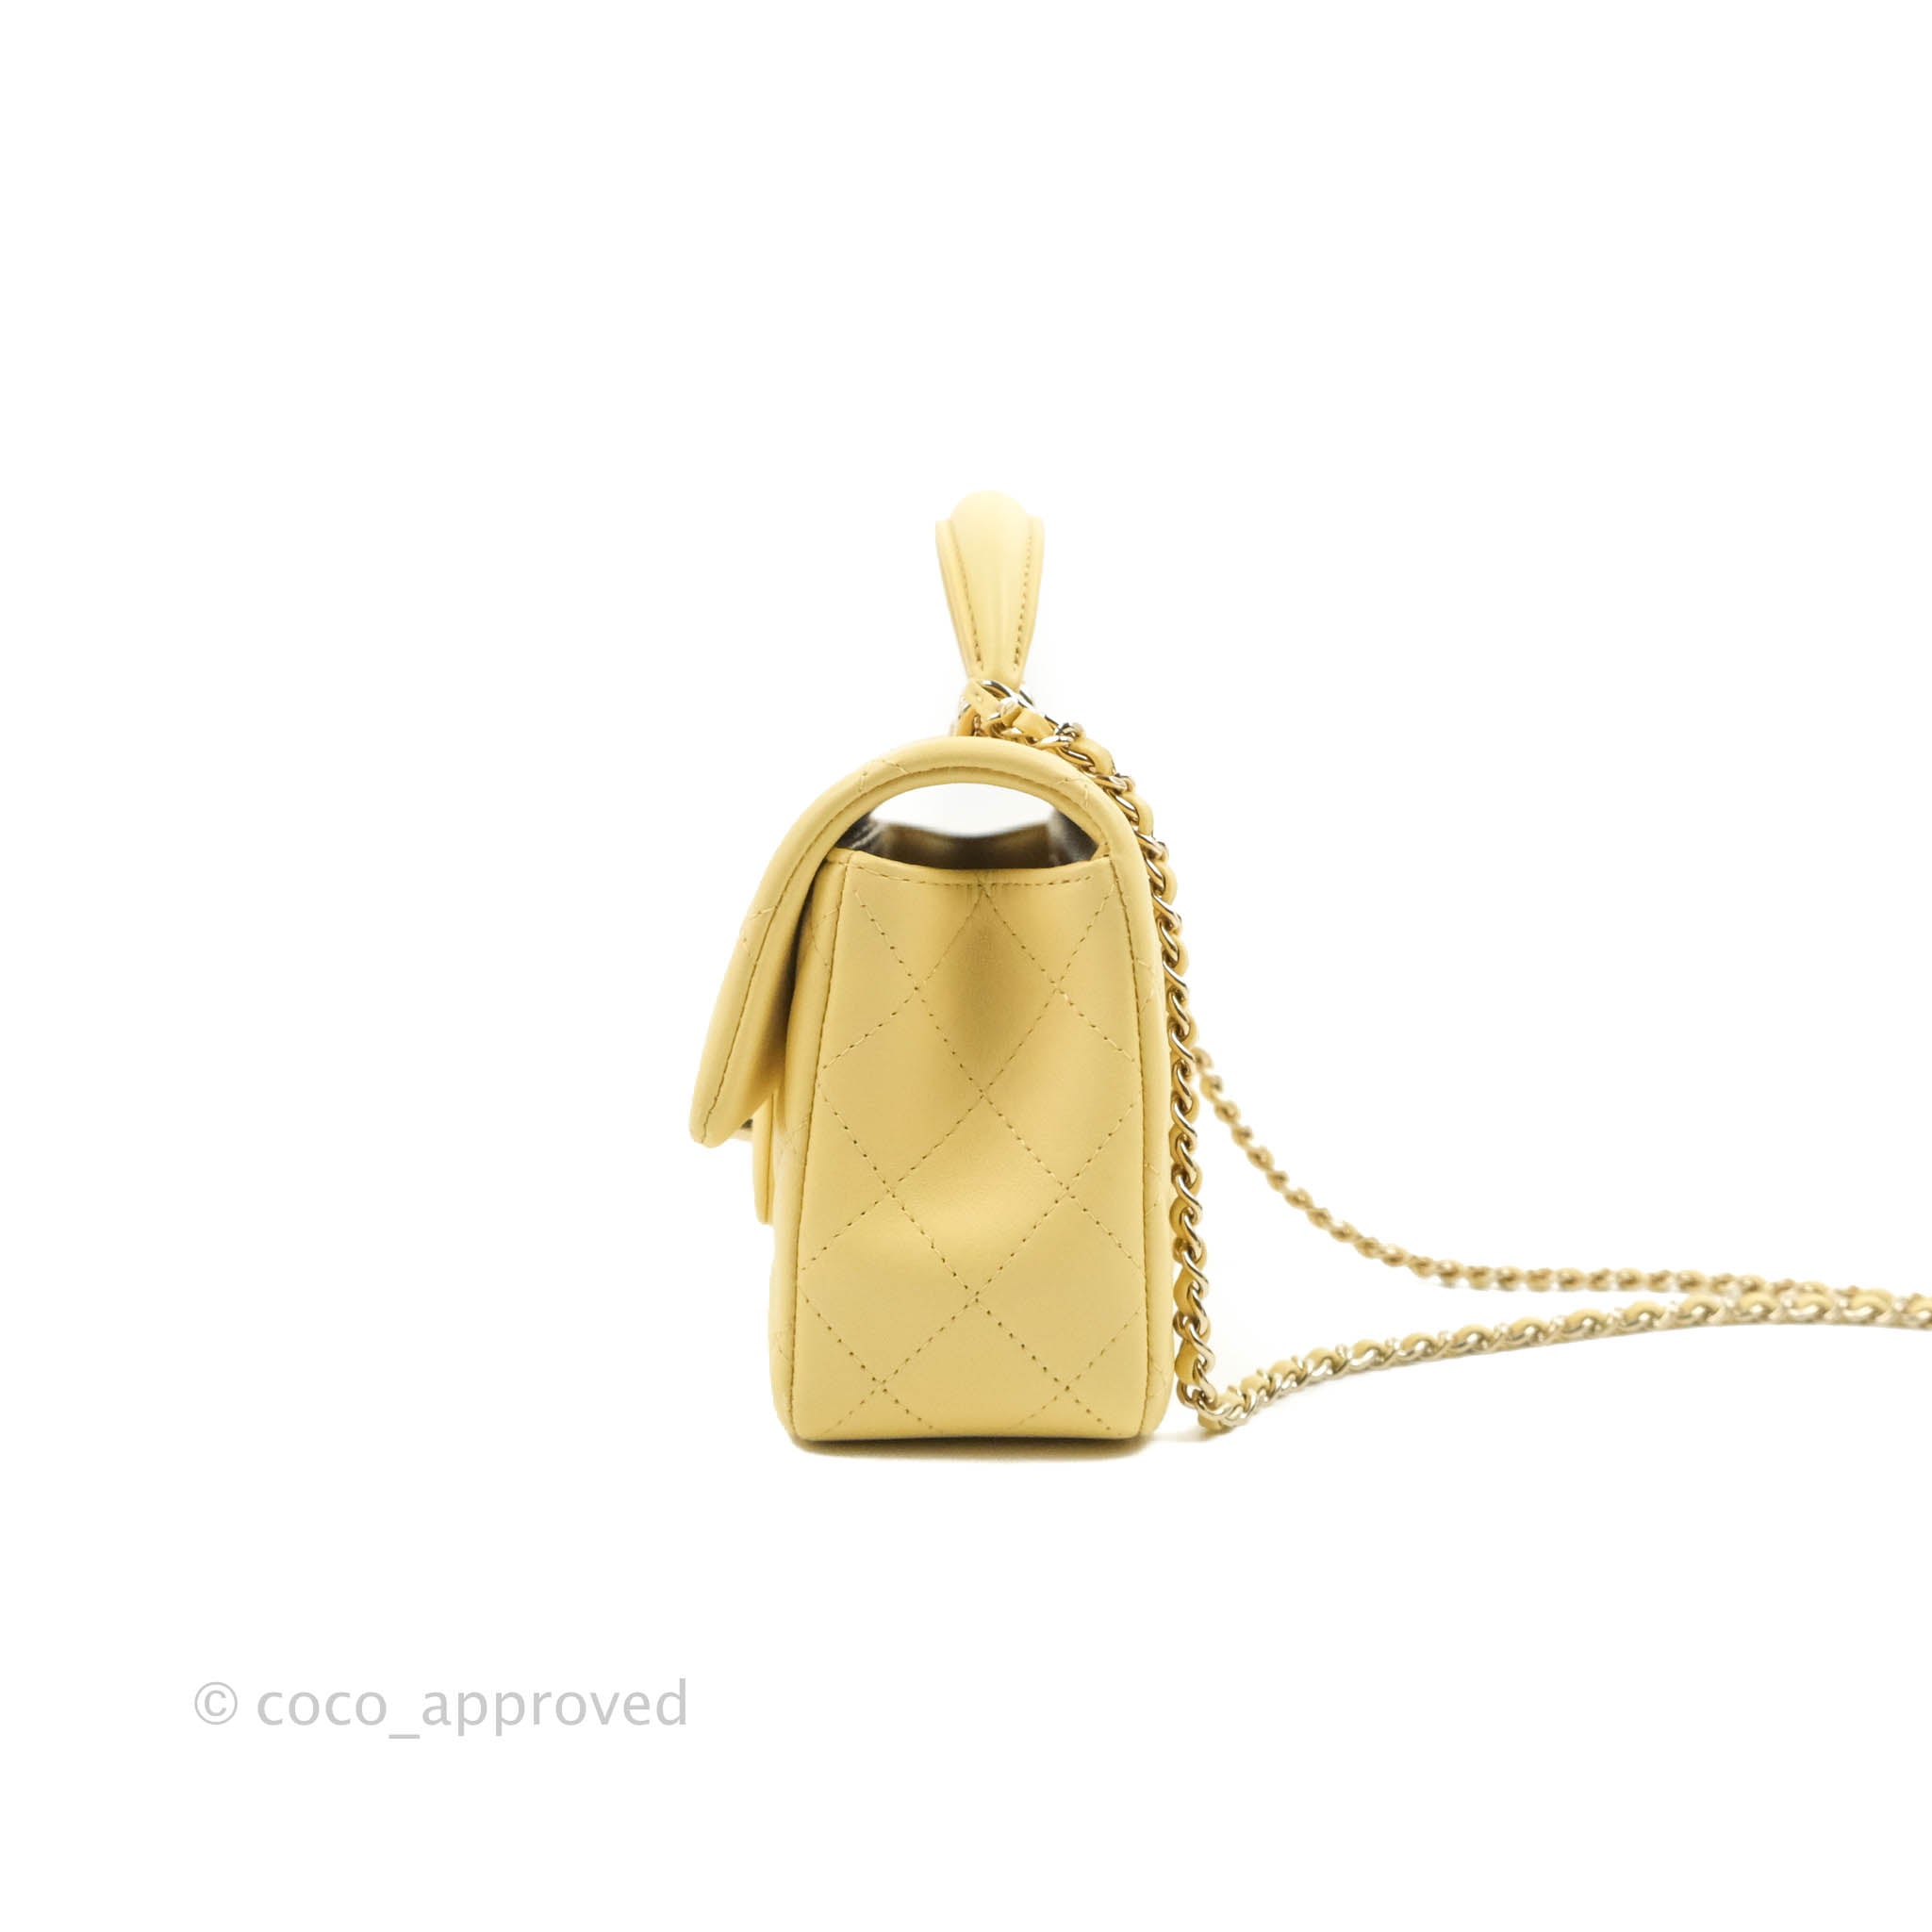 Yellow Quilted Caviar Coco Handle Bag Mini